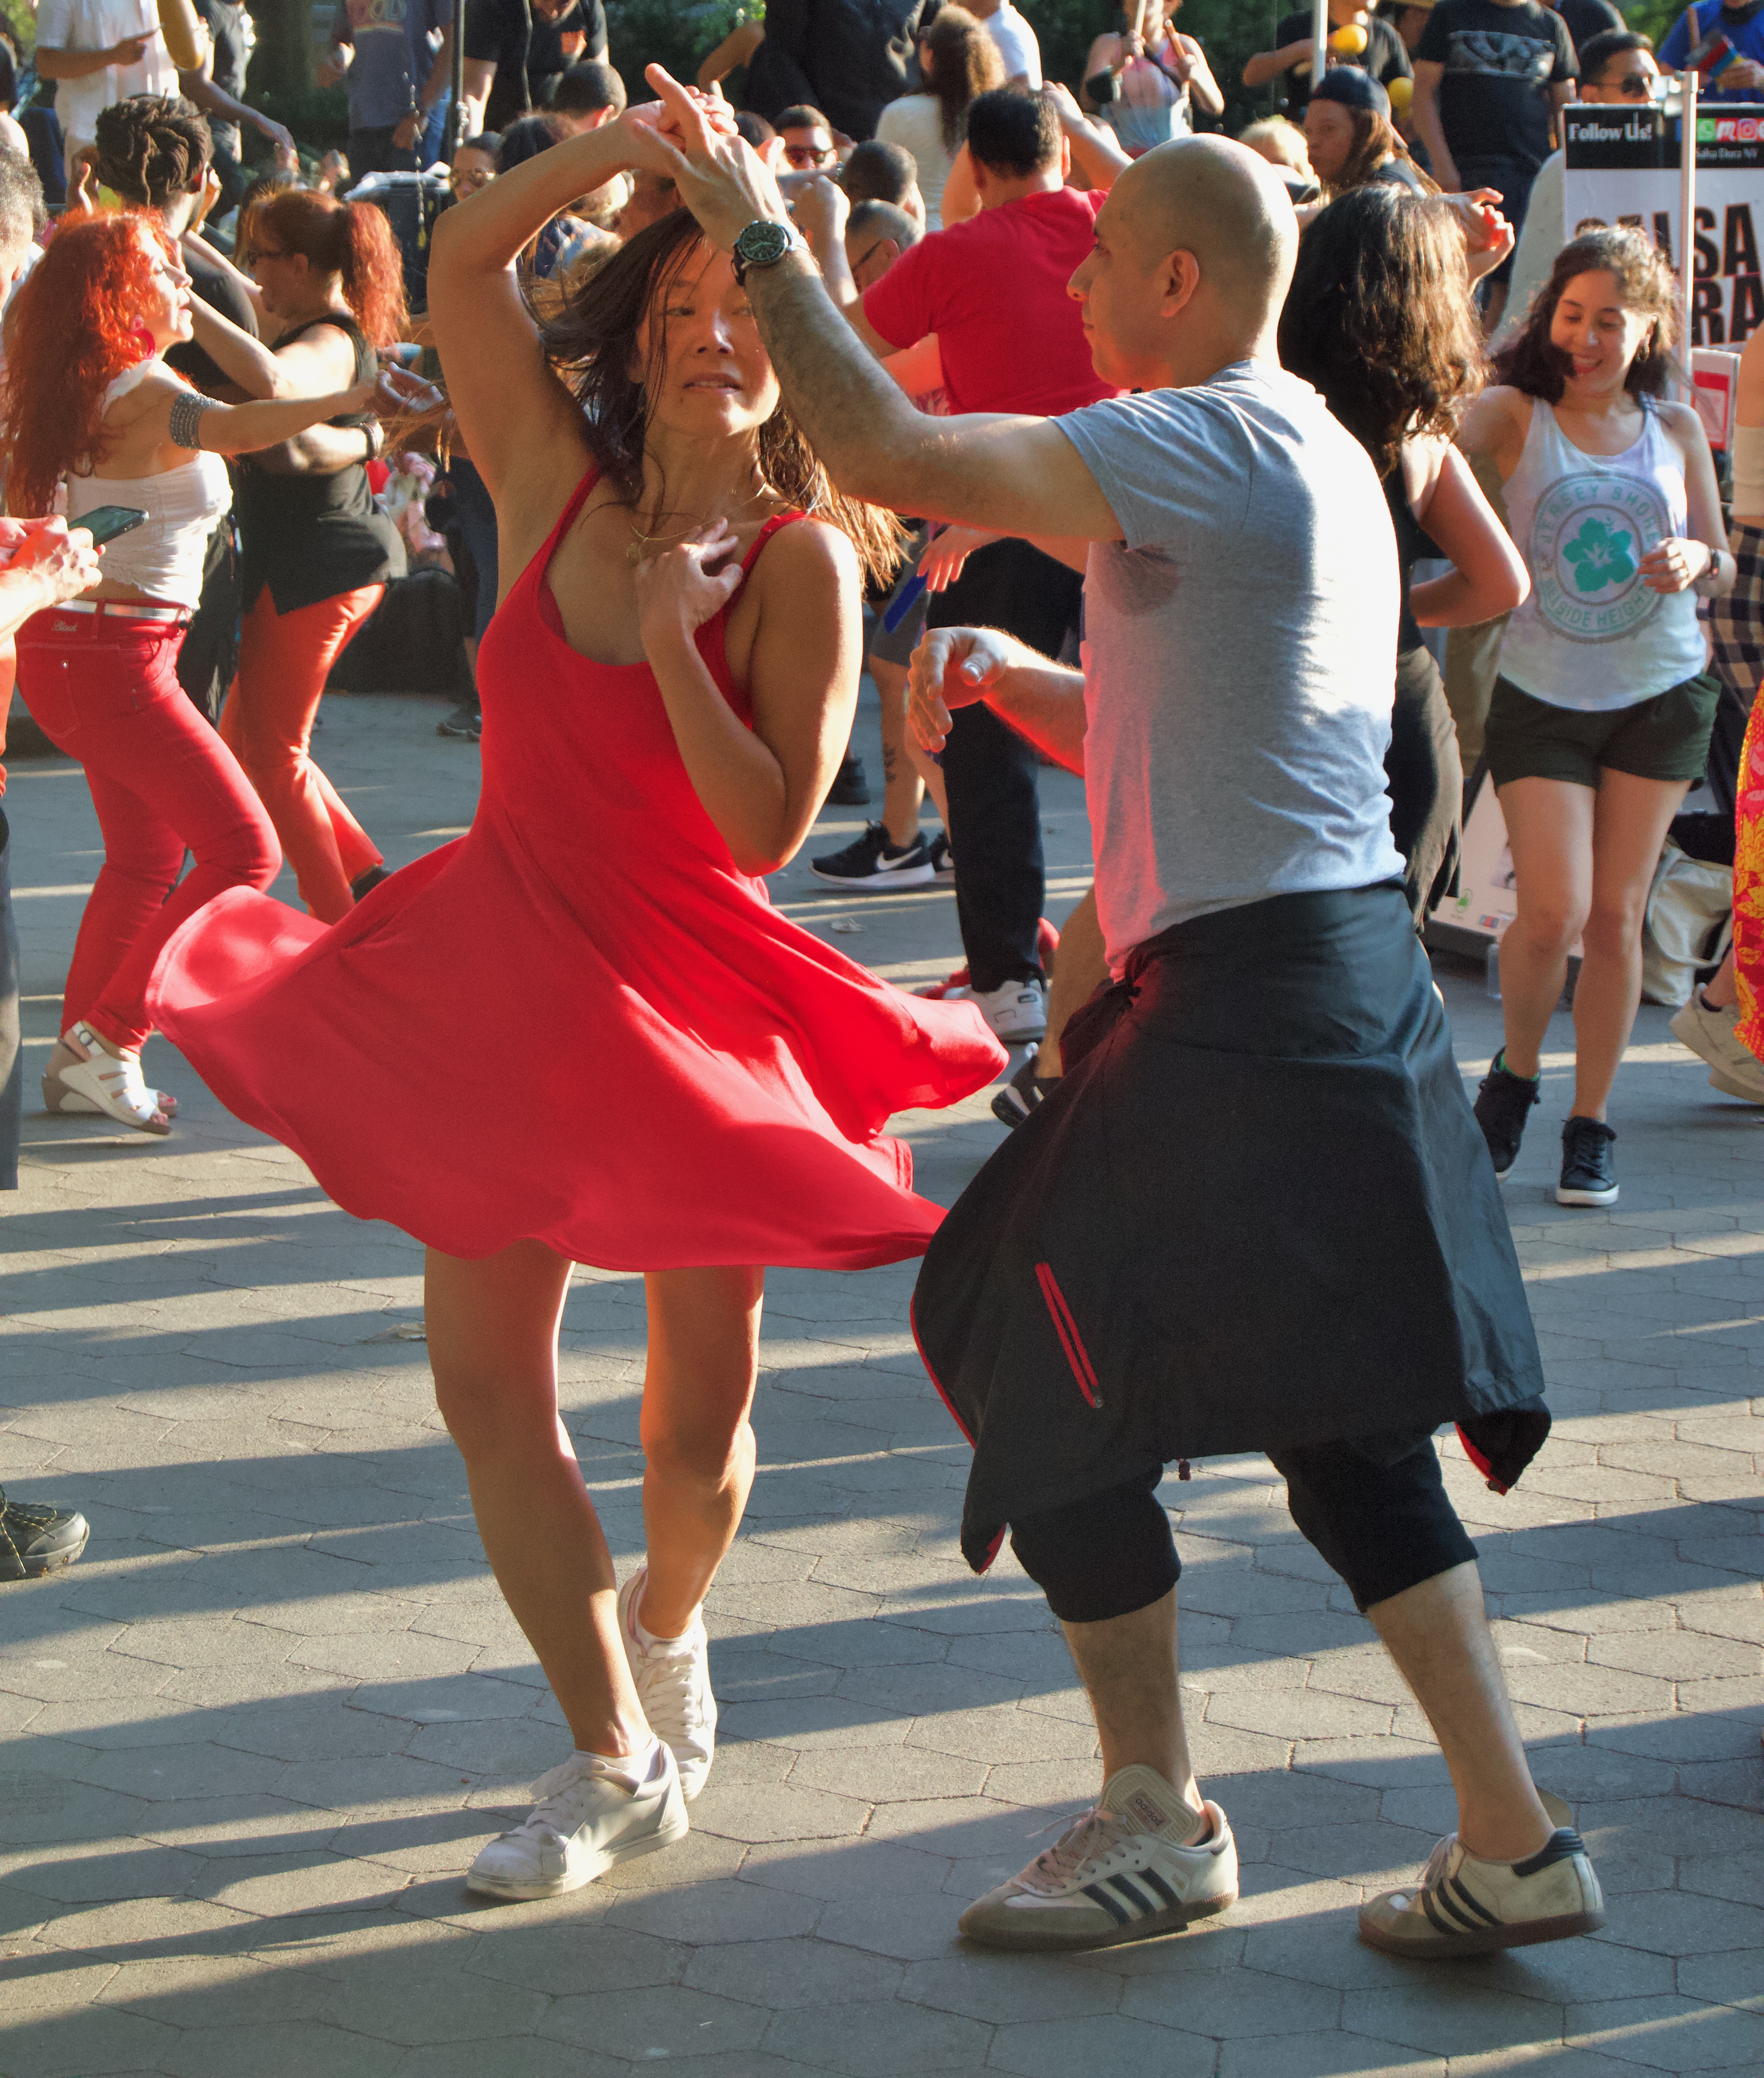 a lady in a red dress salsa dances with her partner